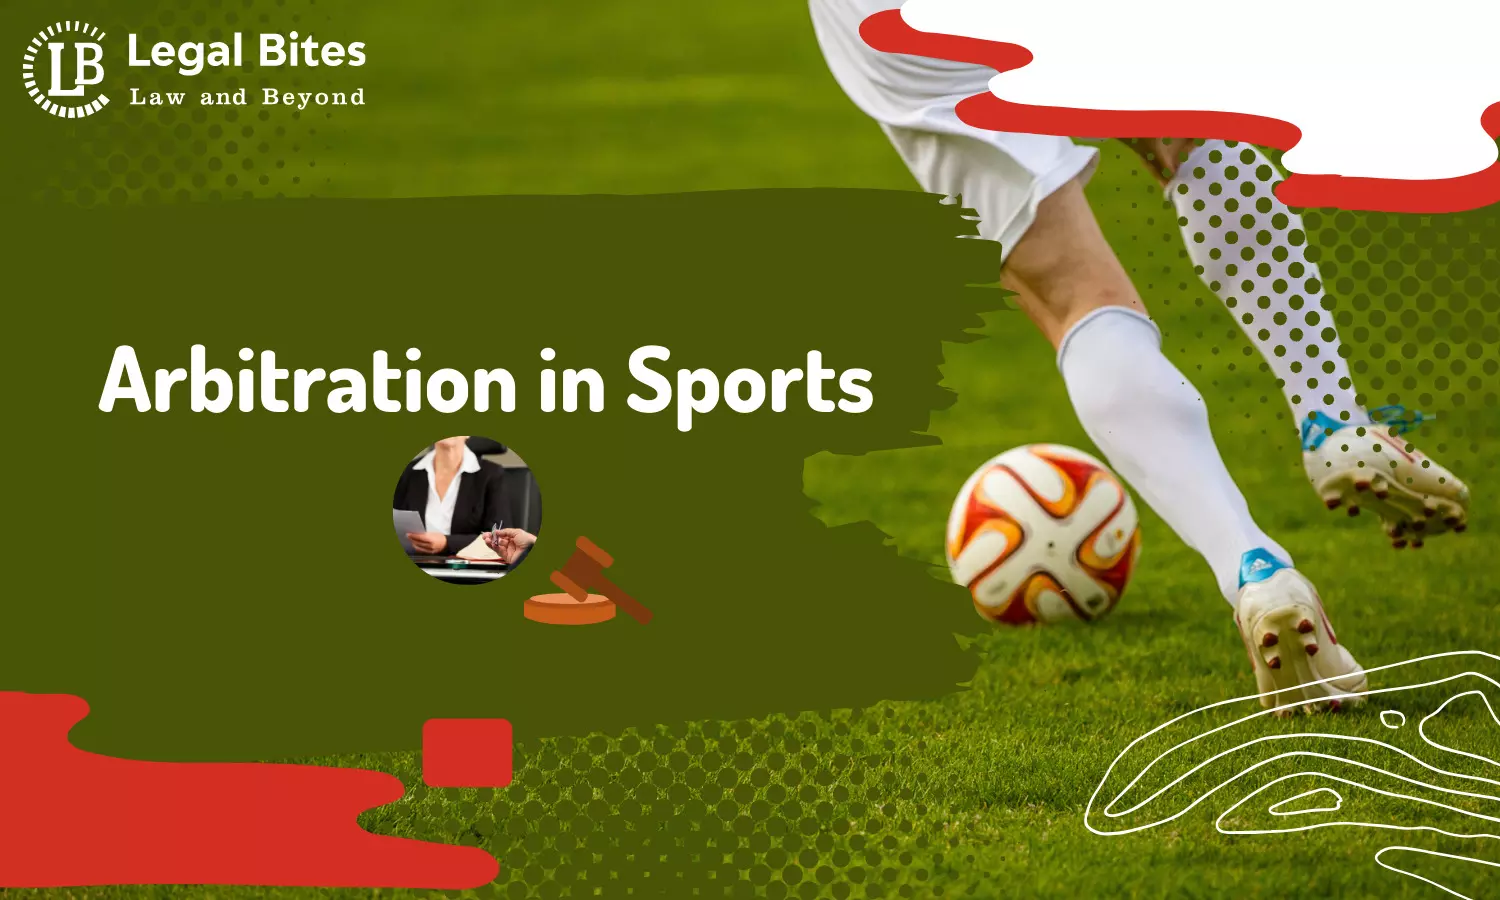 Arbitration in Sports